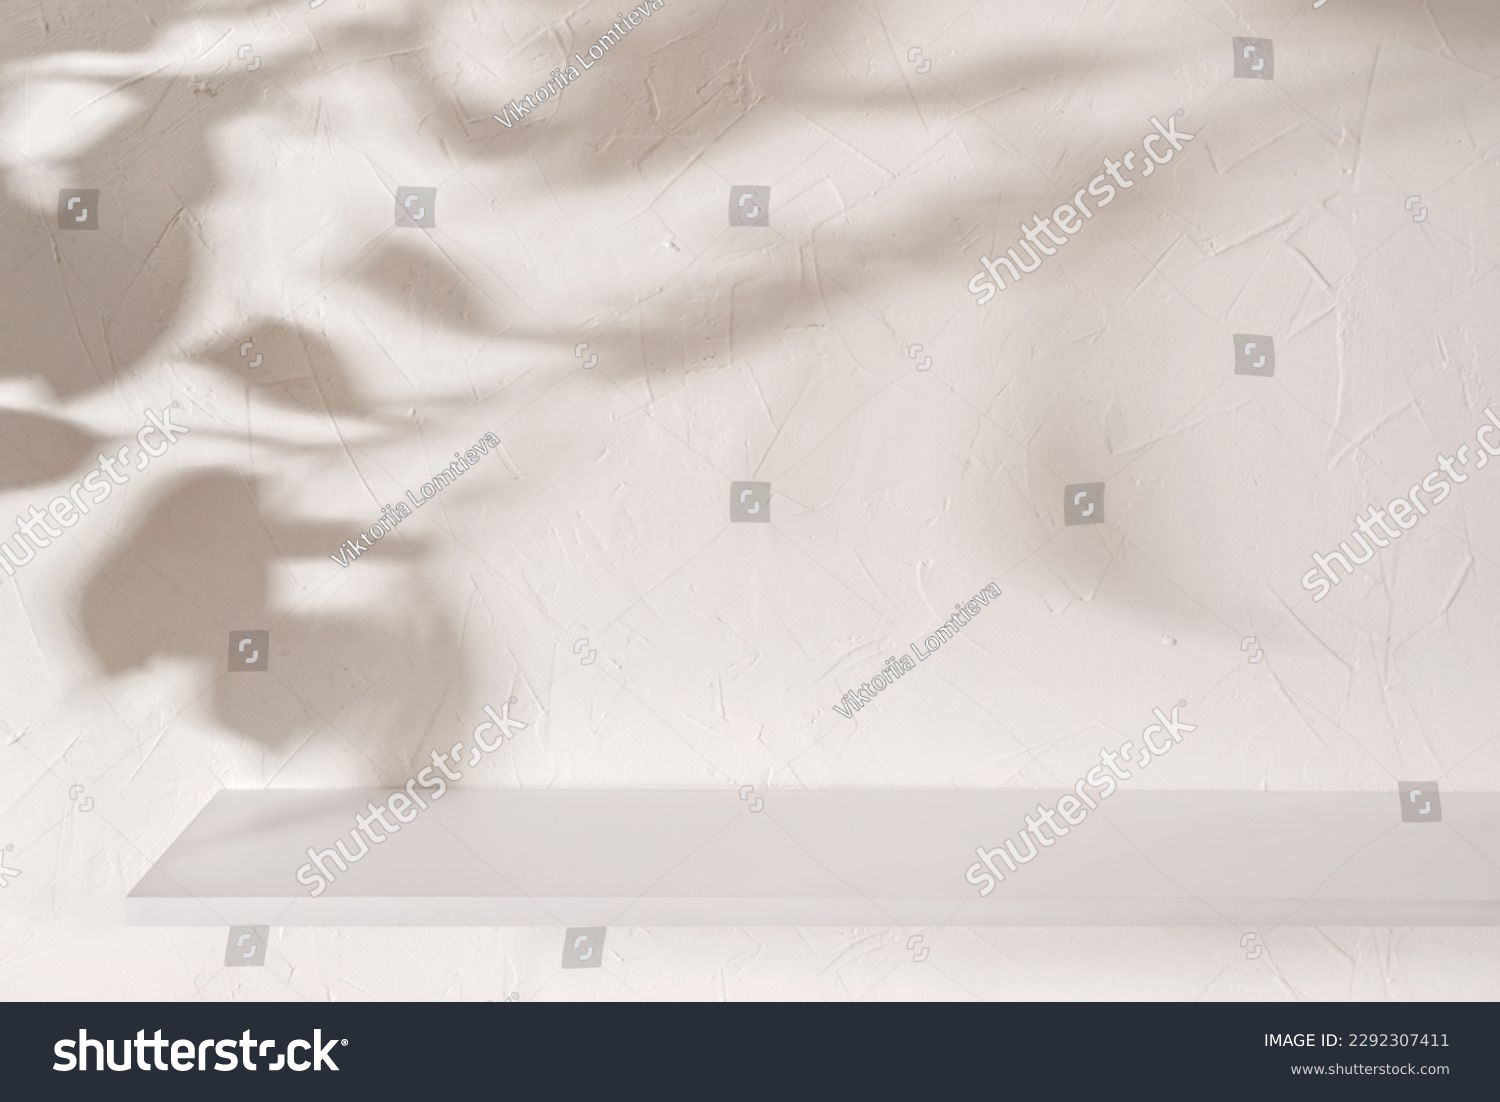 Empty shelf on a beige textured plaster wall background with aesthetic floral sun light shadows, product stand or podium design template for business branding advertisement, mockup with copy space #2292307411